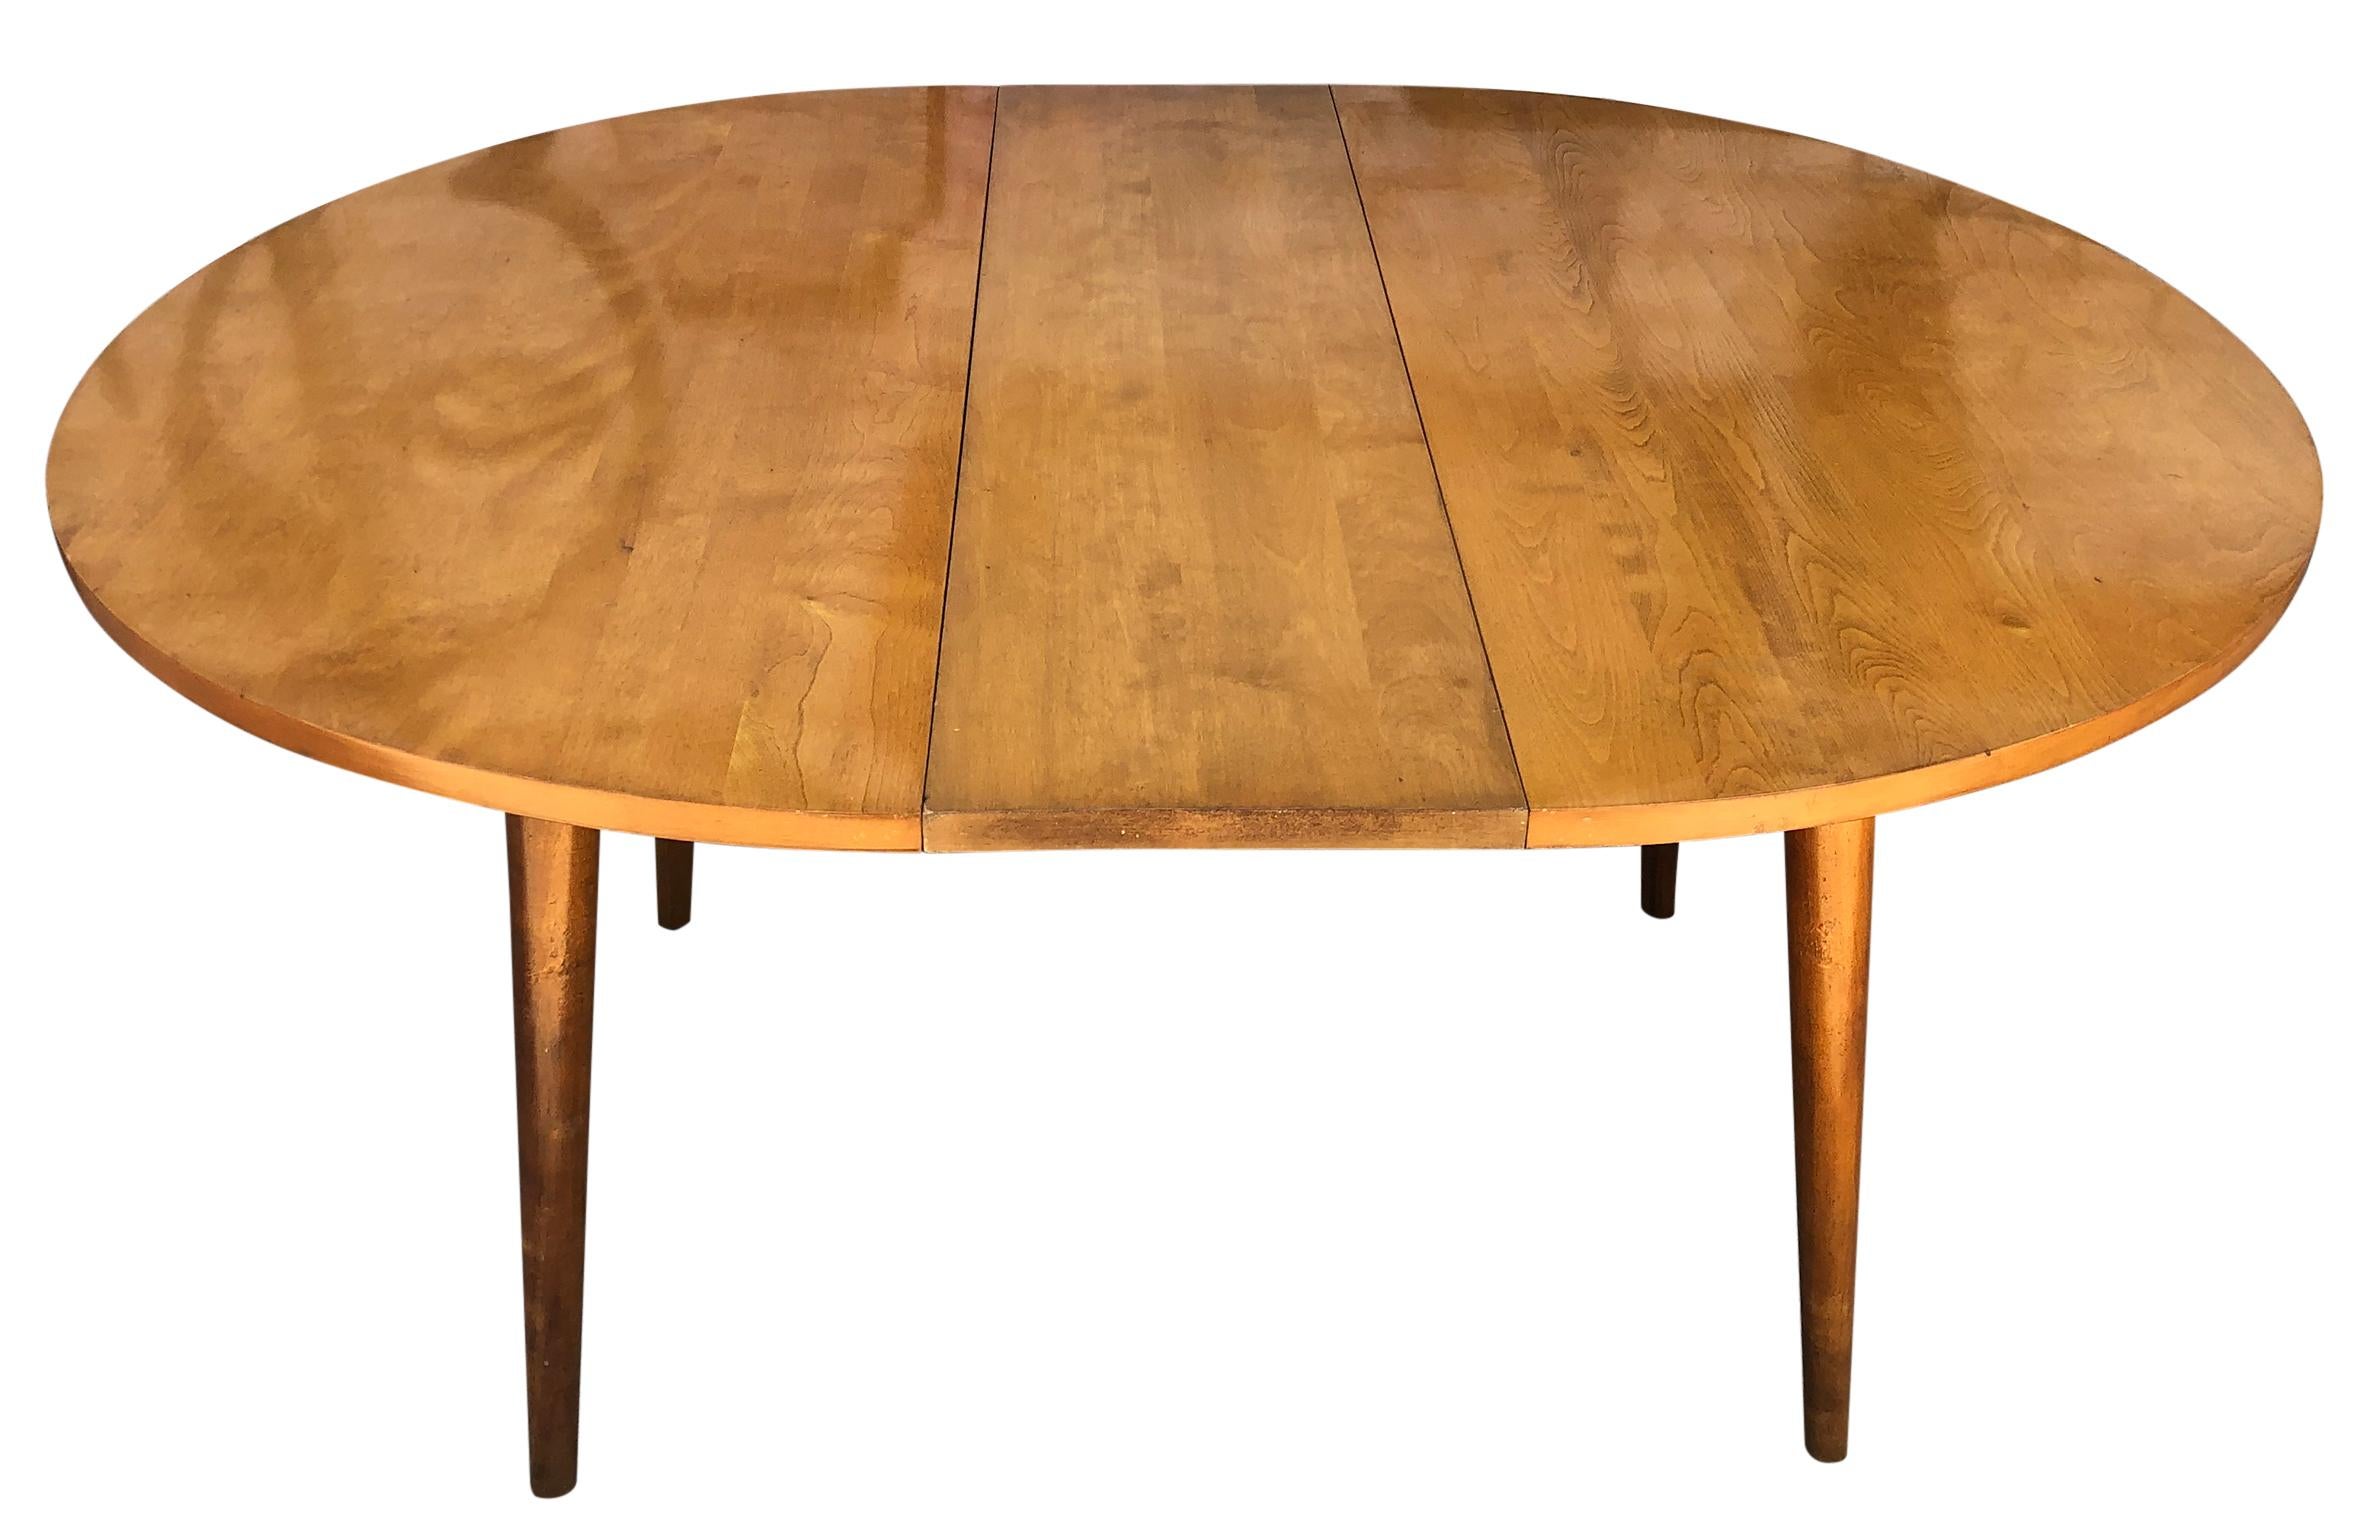 American Round Rare Leslie Diamond Maple Dining Table with 2 Leaves Tapered Legs